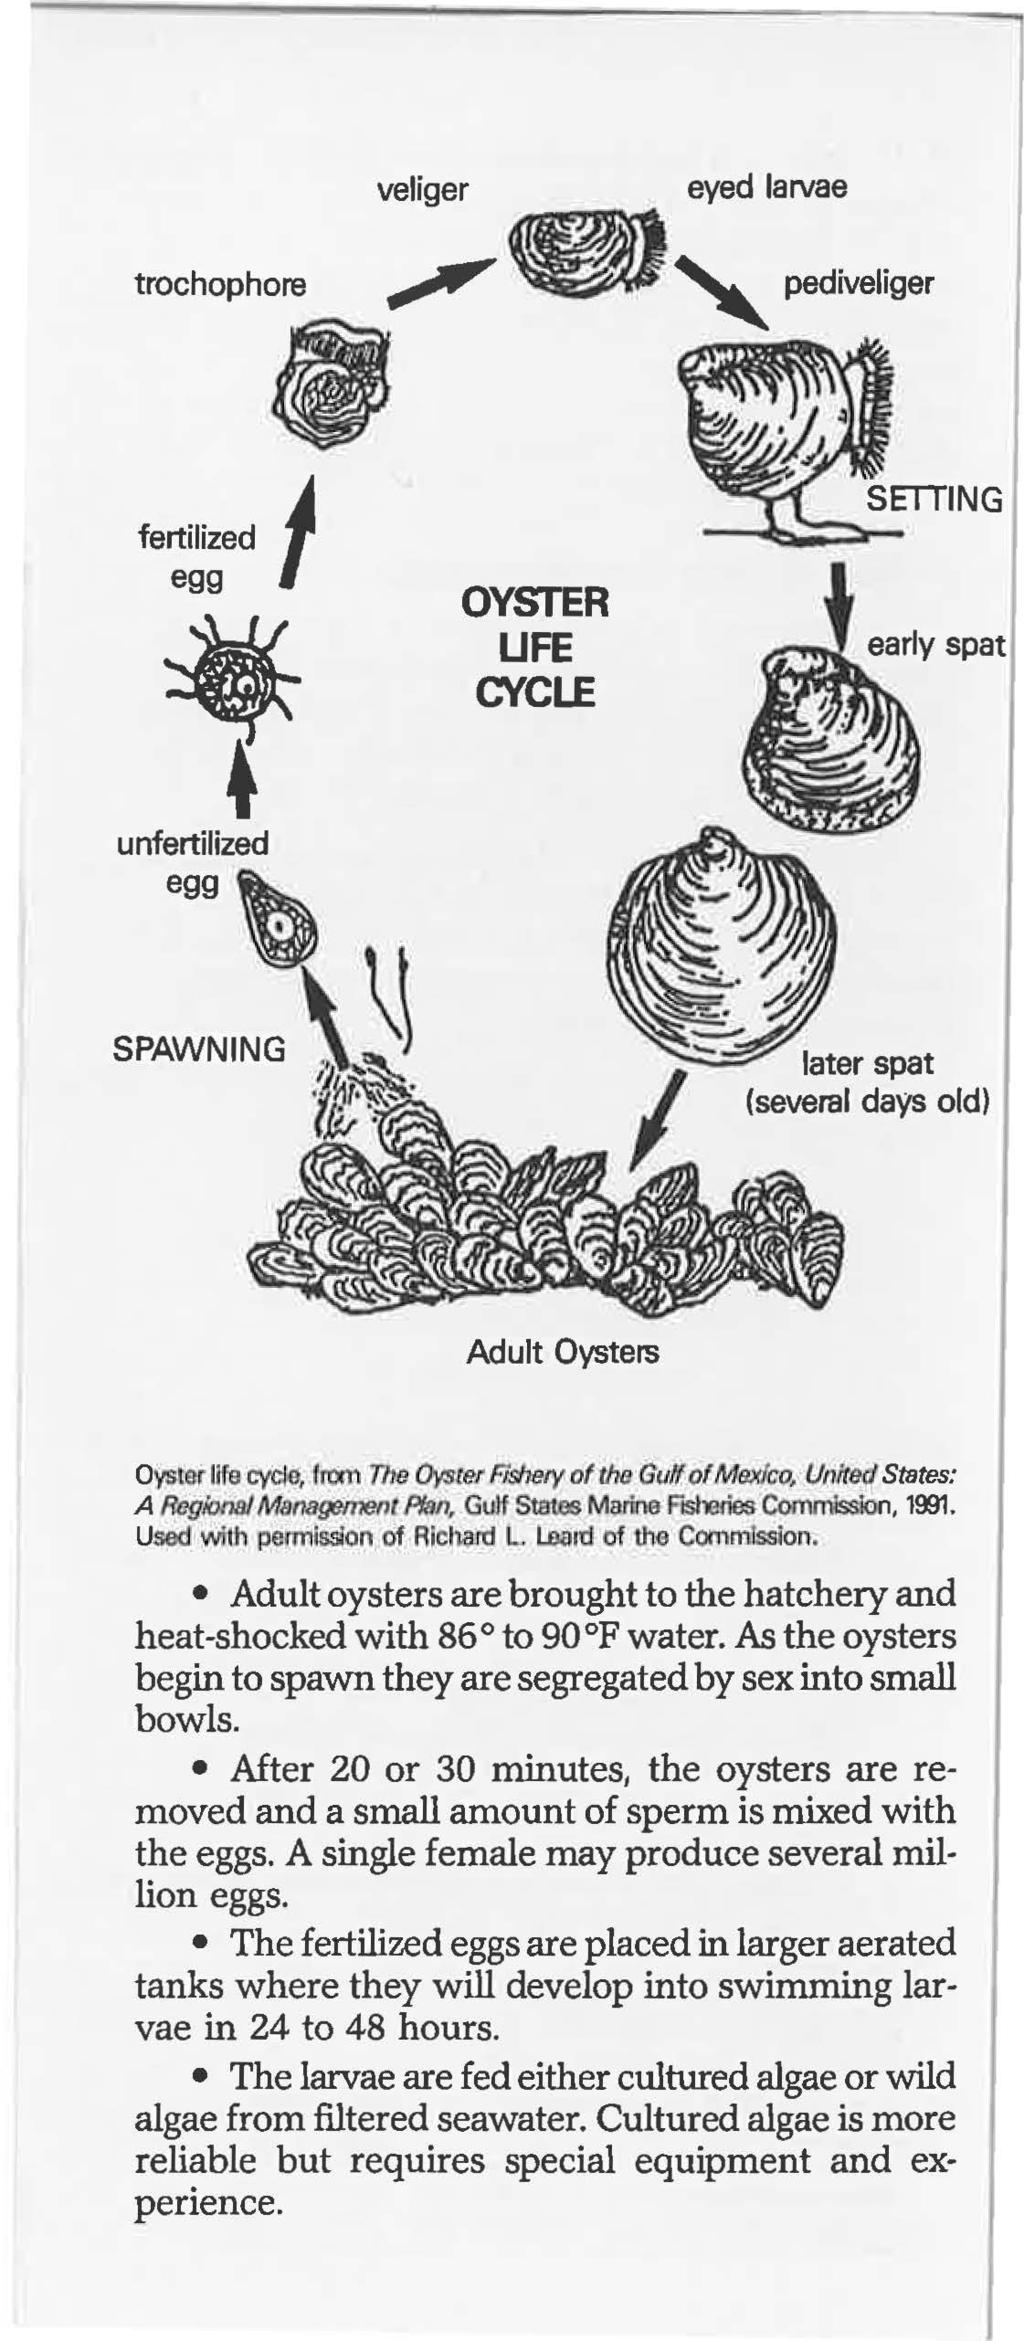 veliger eyed larvae trochopho"' ;II" UJ' pedivehge< - ~,w fertilized ~ egg ~- OYSTER UFE CYCLE Adult Oysters Oyster life cycle, trom The Oyster AshetY of rho GuH of Muxfco, Unired States: A Rcgfona/